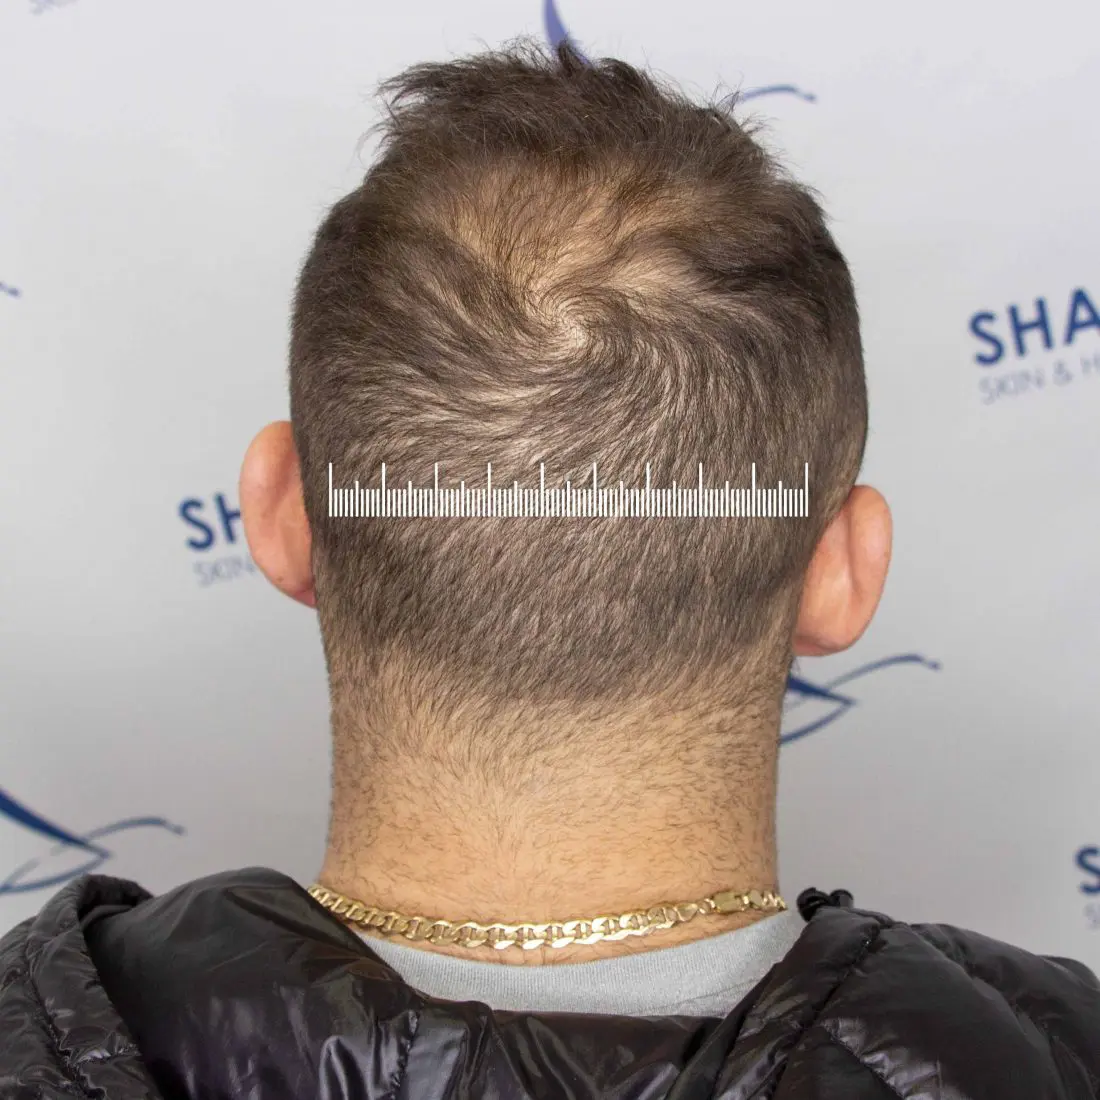 Can I get an FUE hair transplant without anyone knowing?